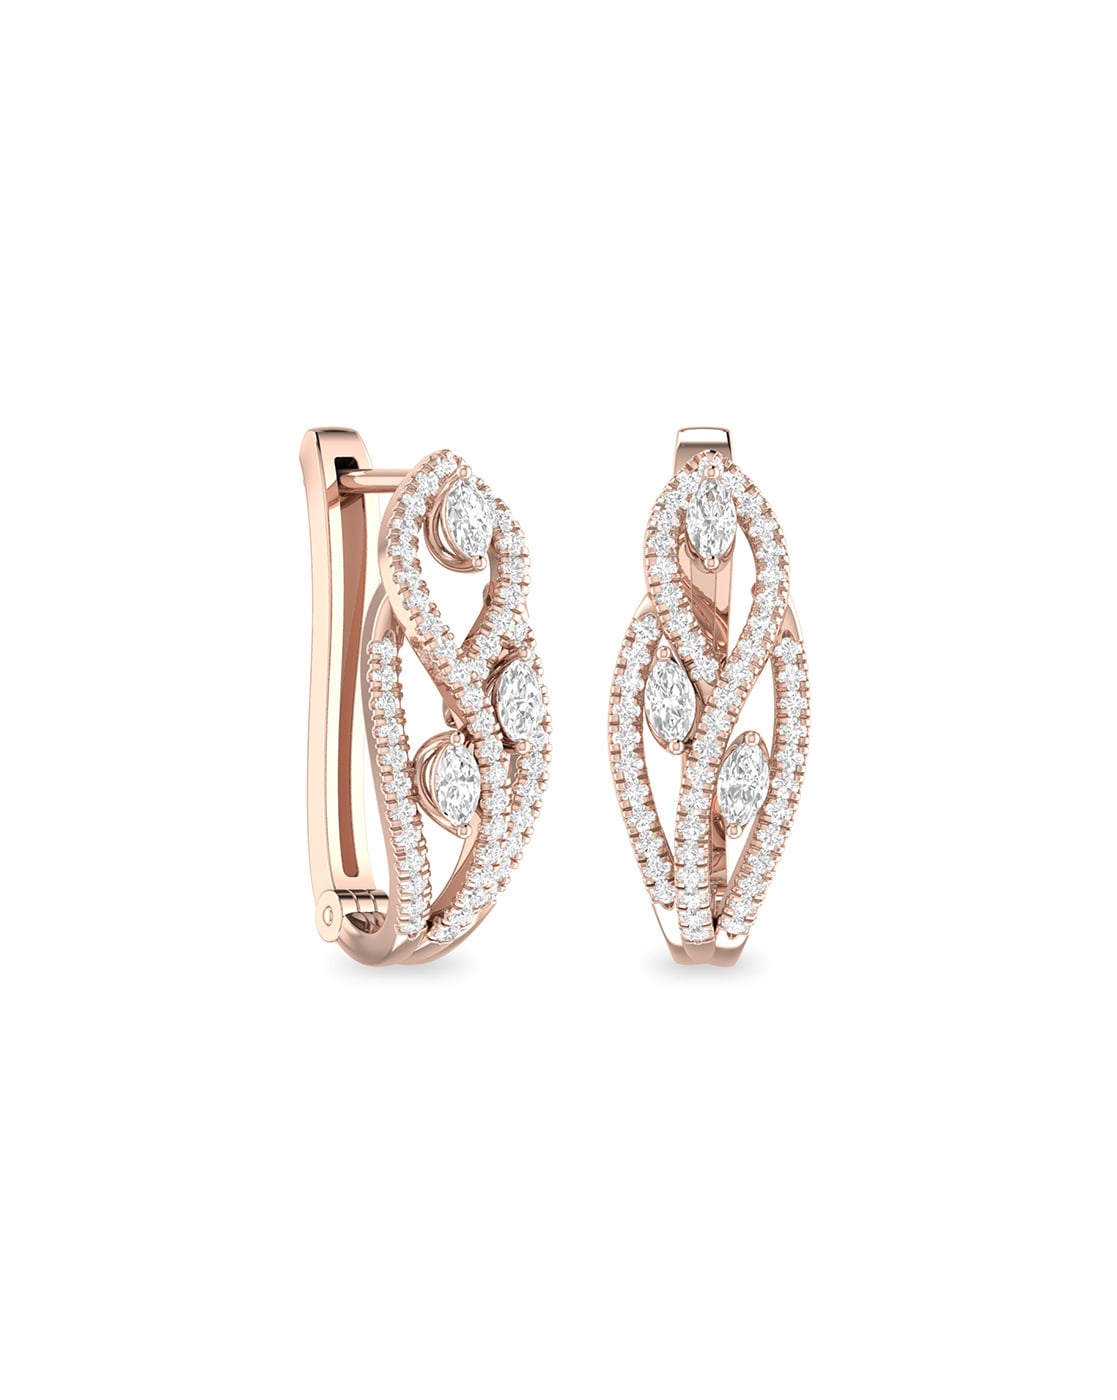 Luxury Big Gold Hoop Earrings For Lady Women Orrous Girls Ear Studs Set  Designer Jewelry Earring Valentines Day Gift Engagement For Bride Luxus  Ohrringe From Iphone_luxury, $0.85